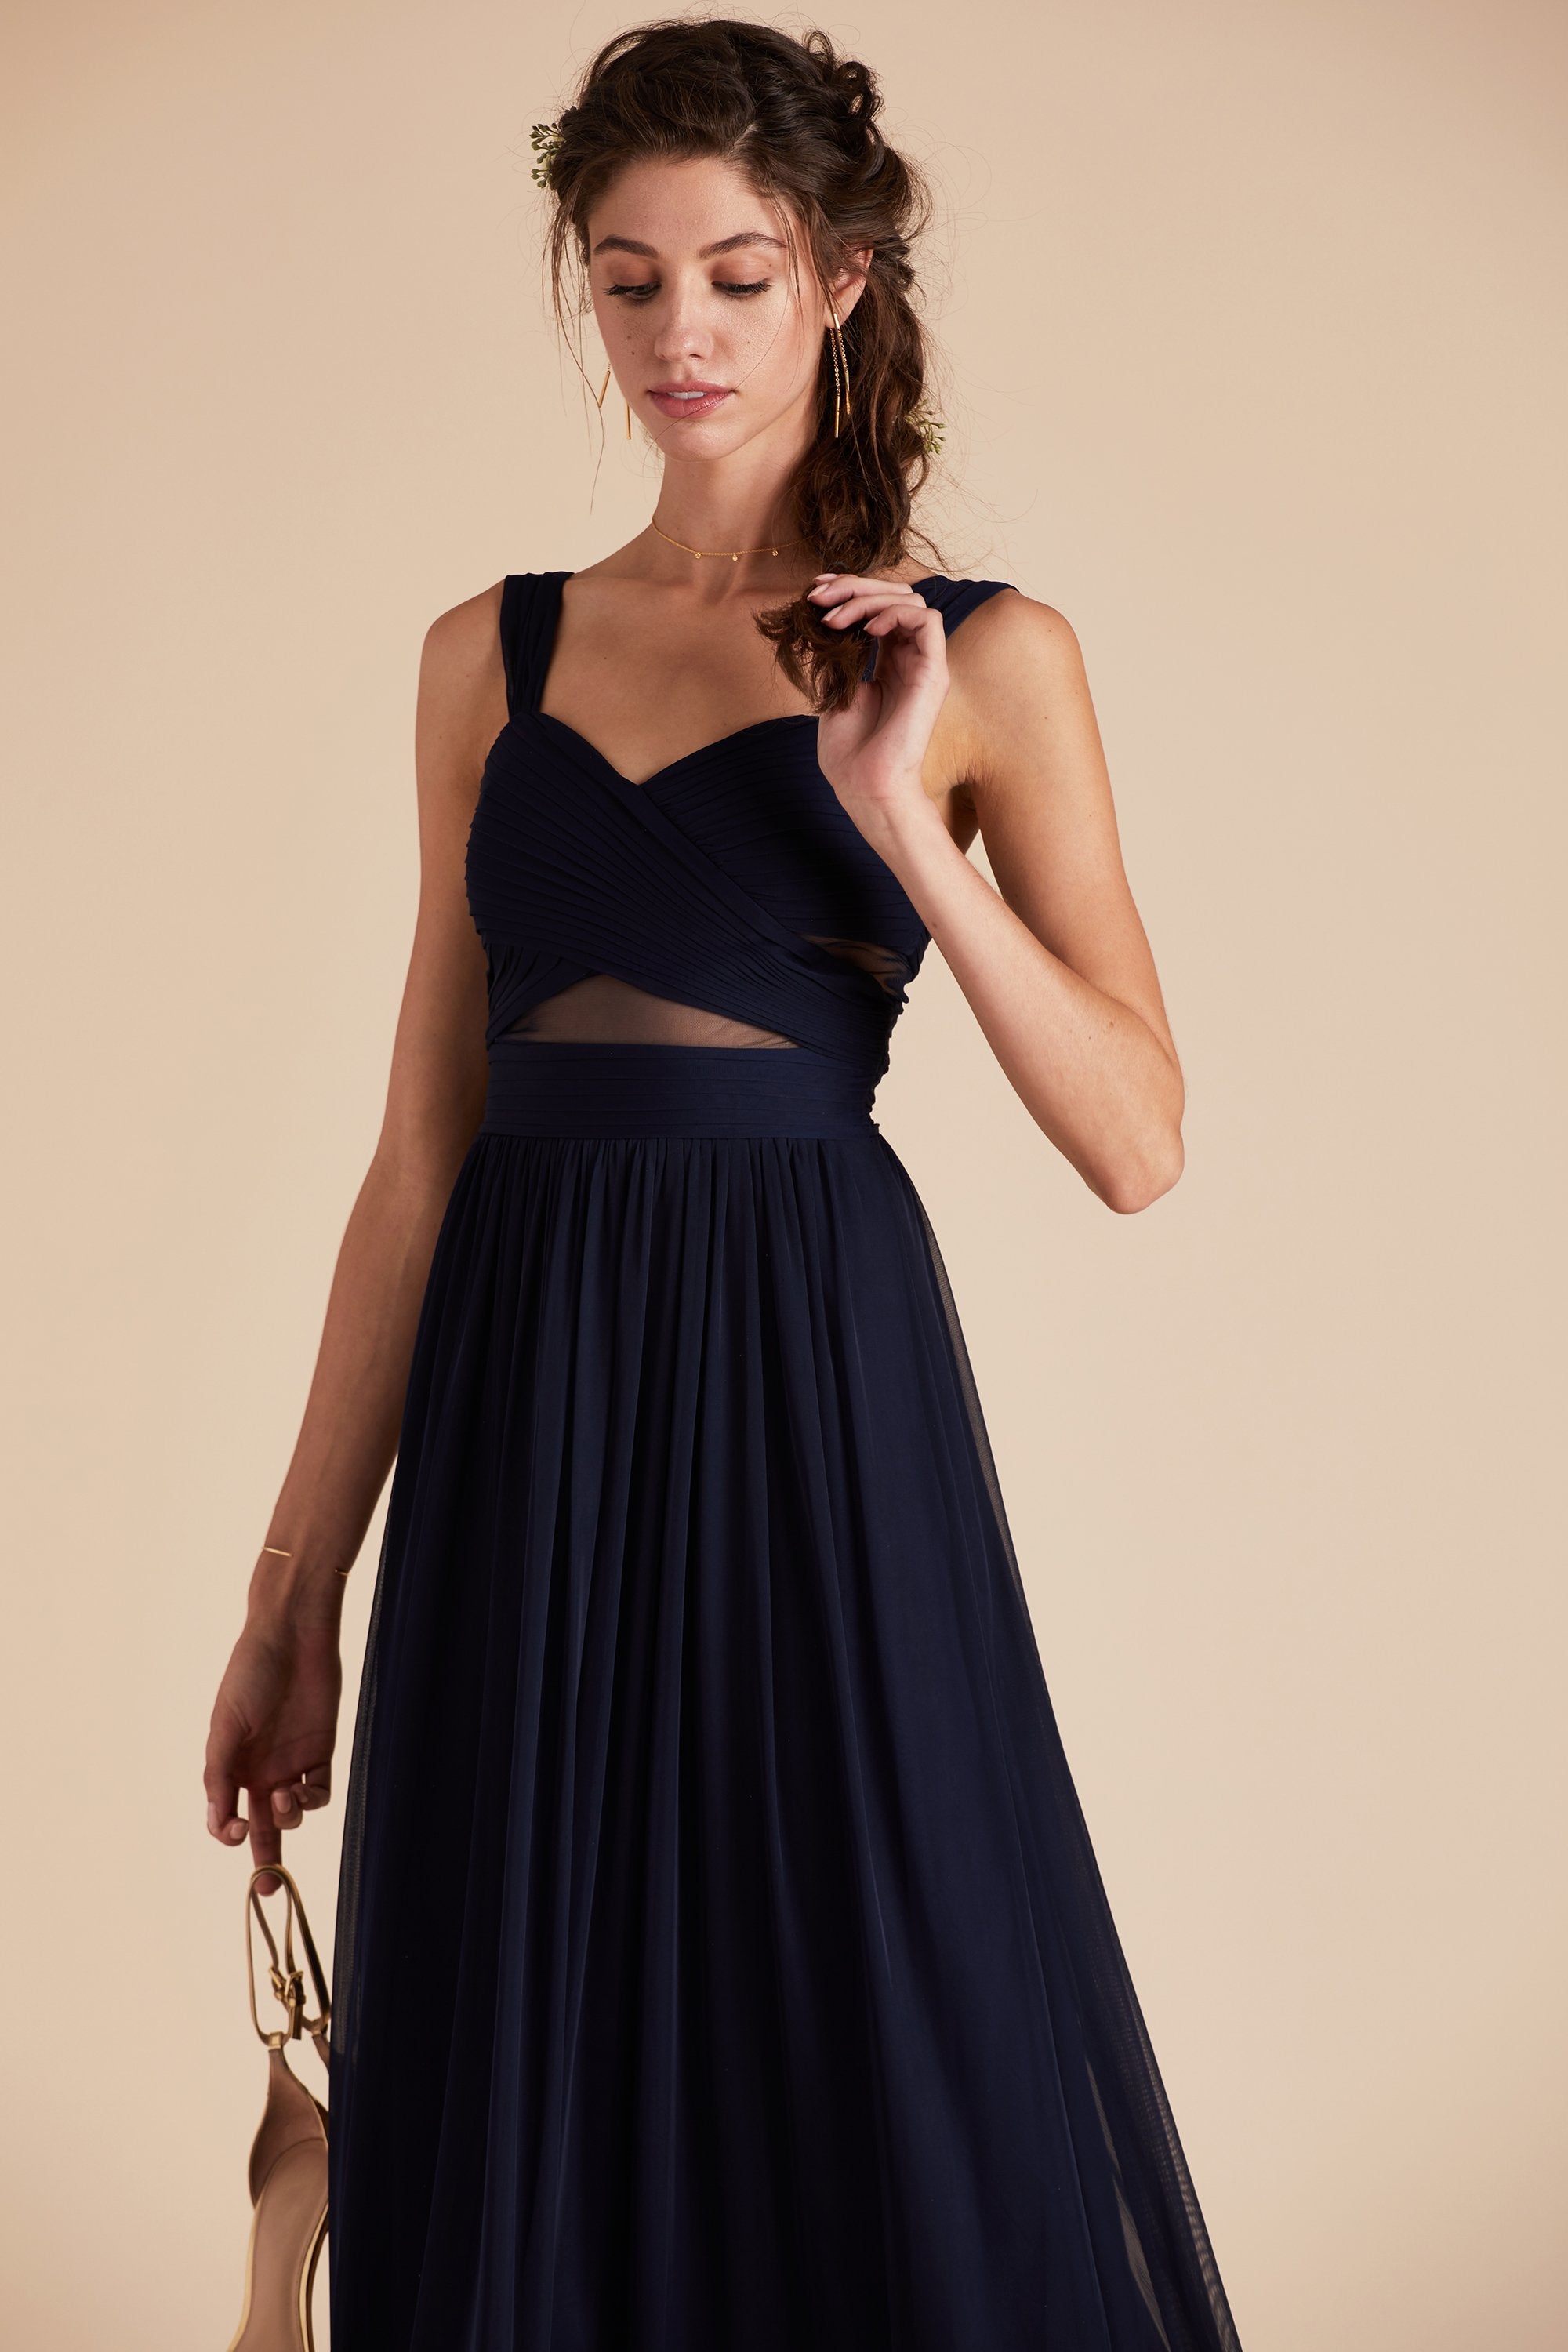 Elsye bridesmaid dress in navy blue chiffon by Birdy Grey, front view